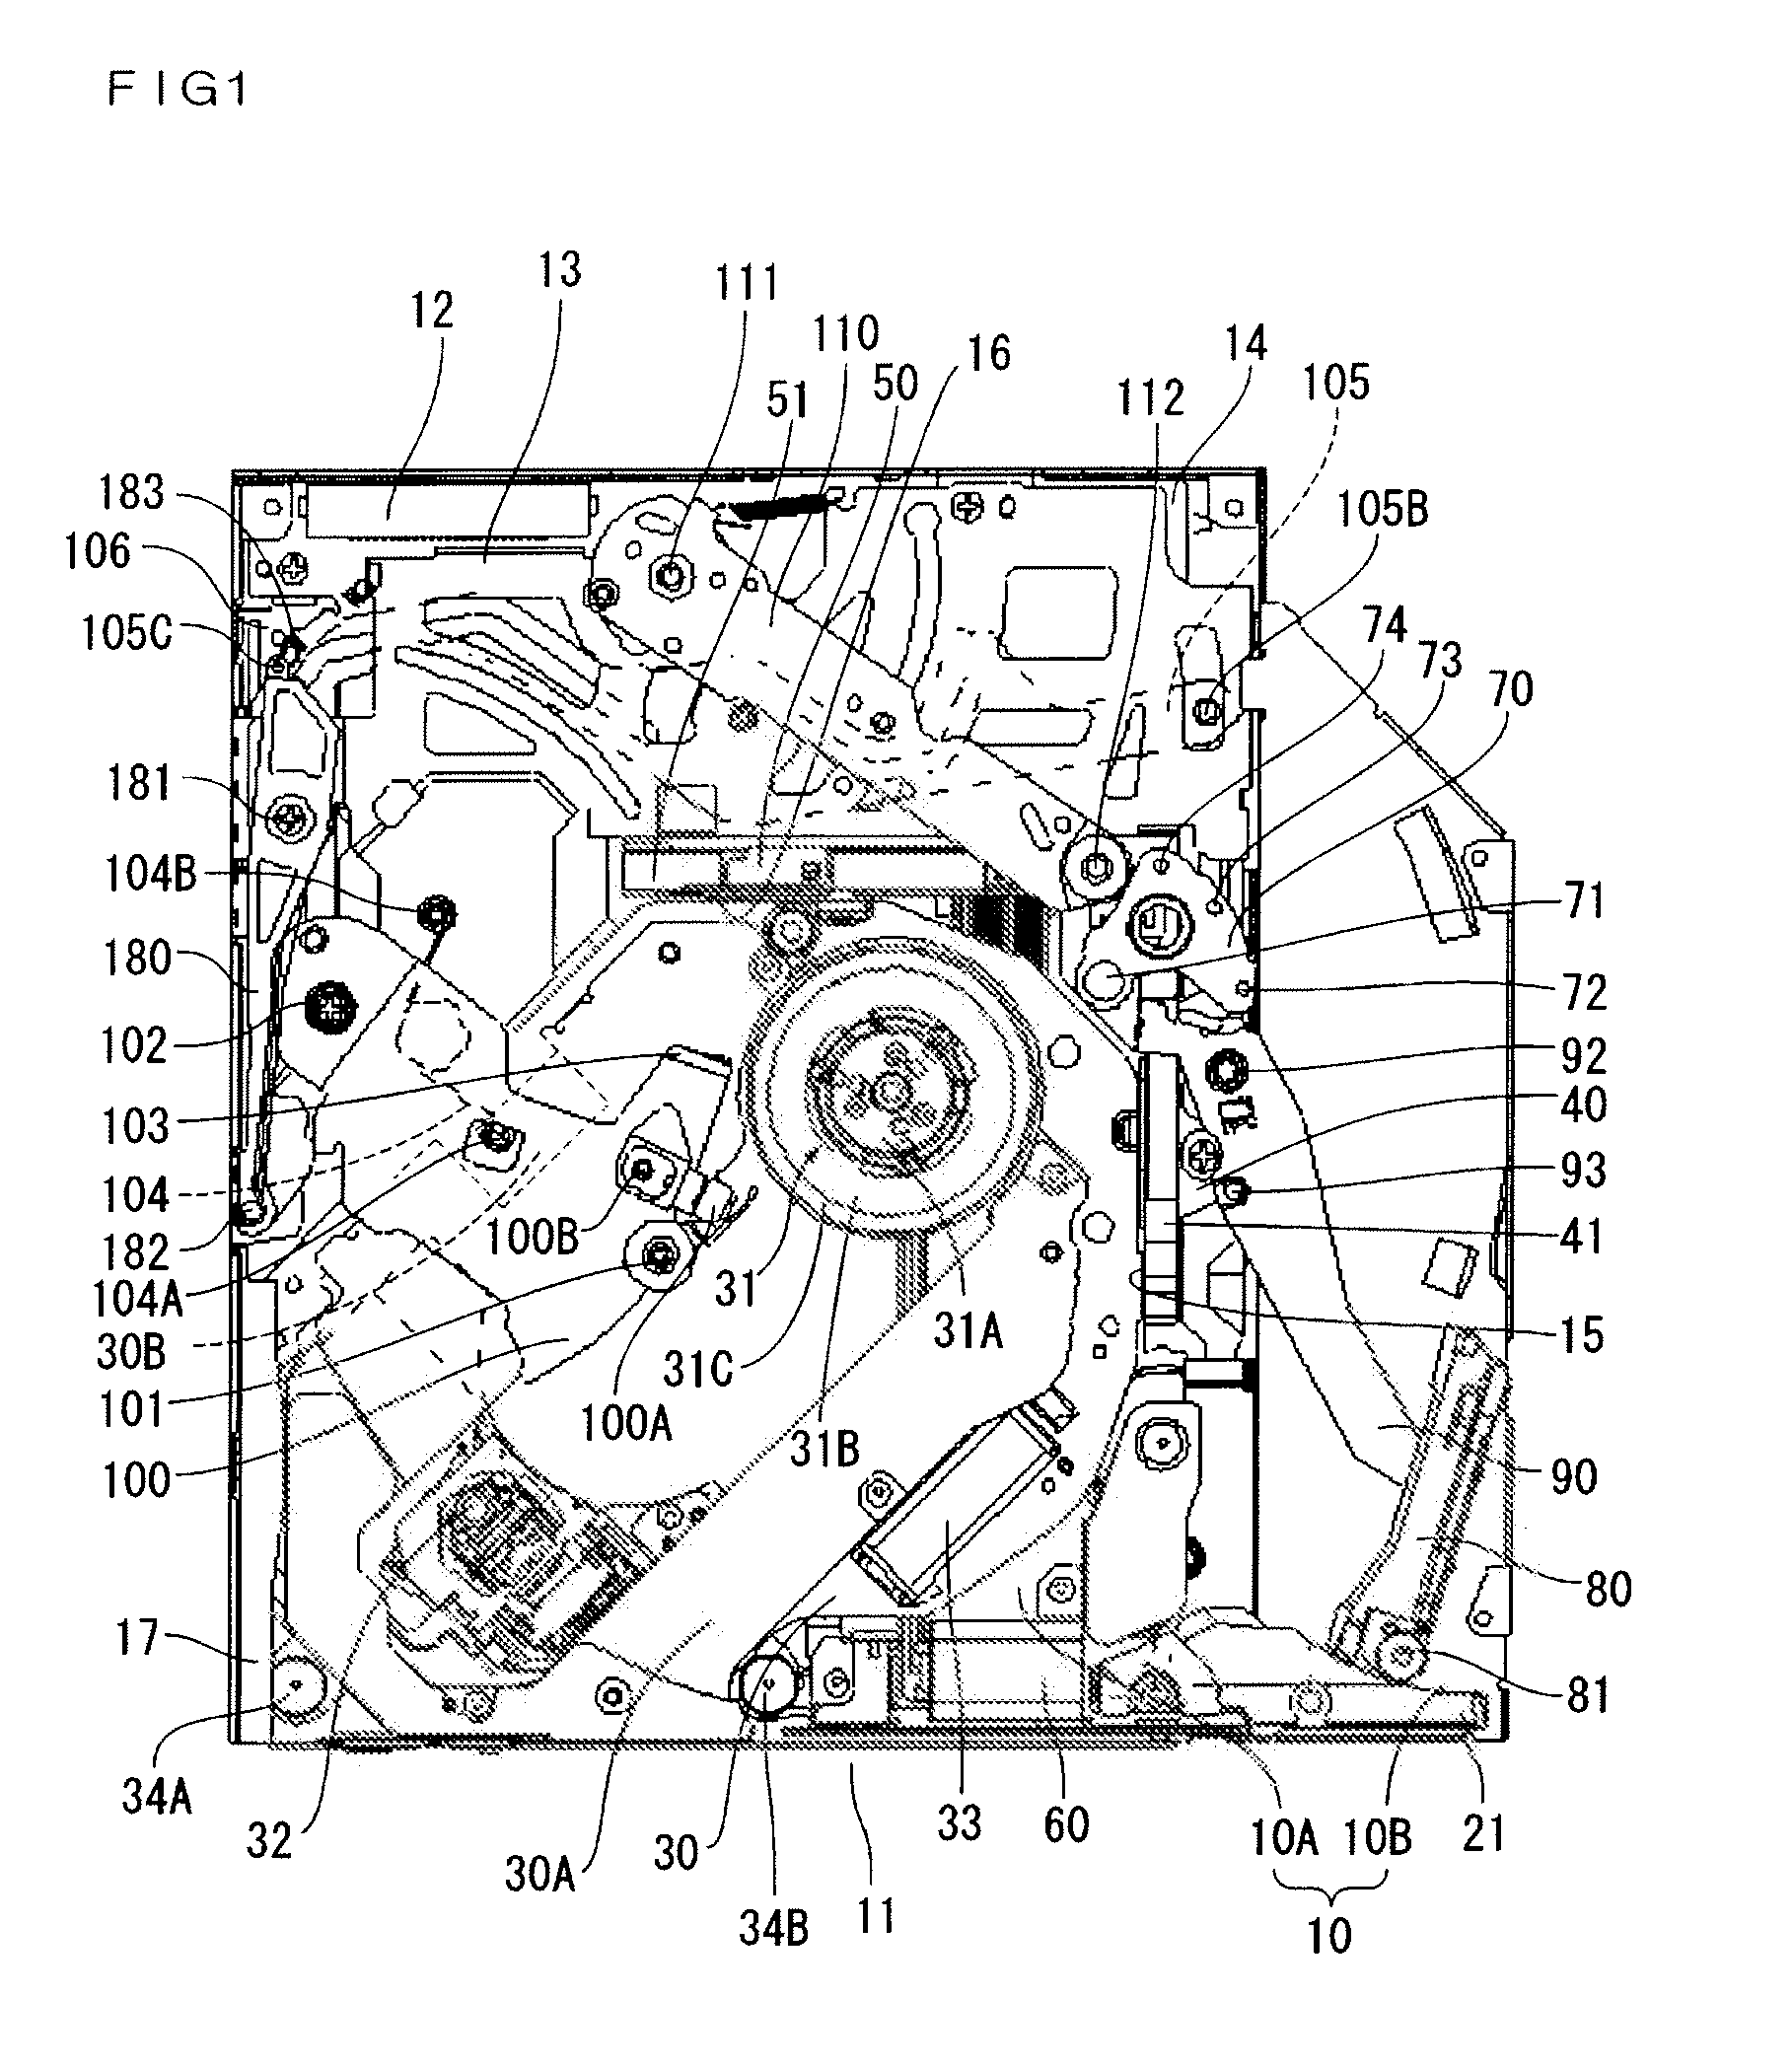 Slot-in type disk apparatus in which a disk is directly operated by a lever